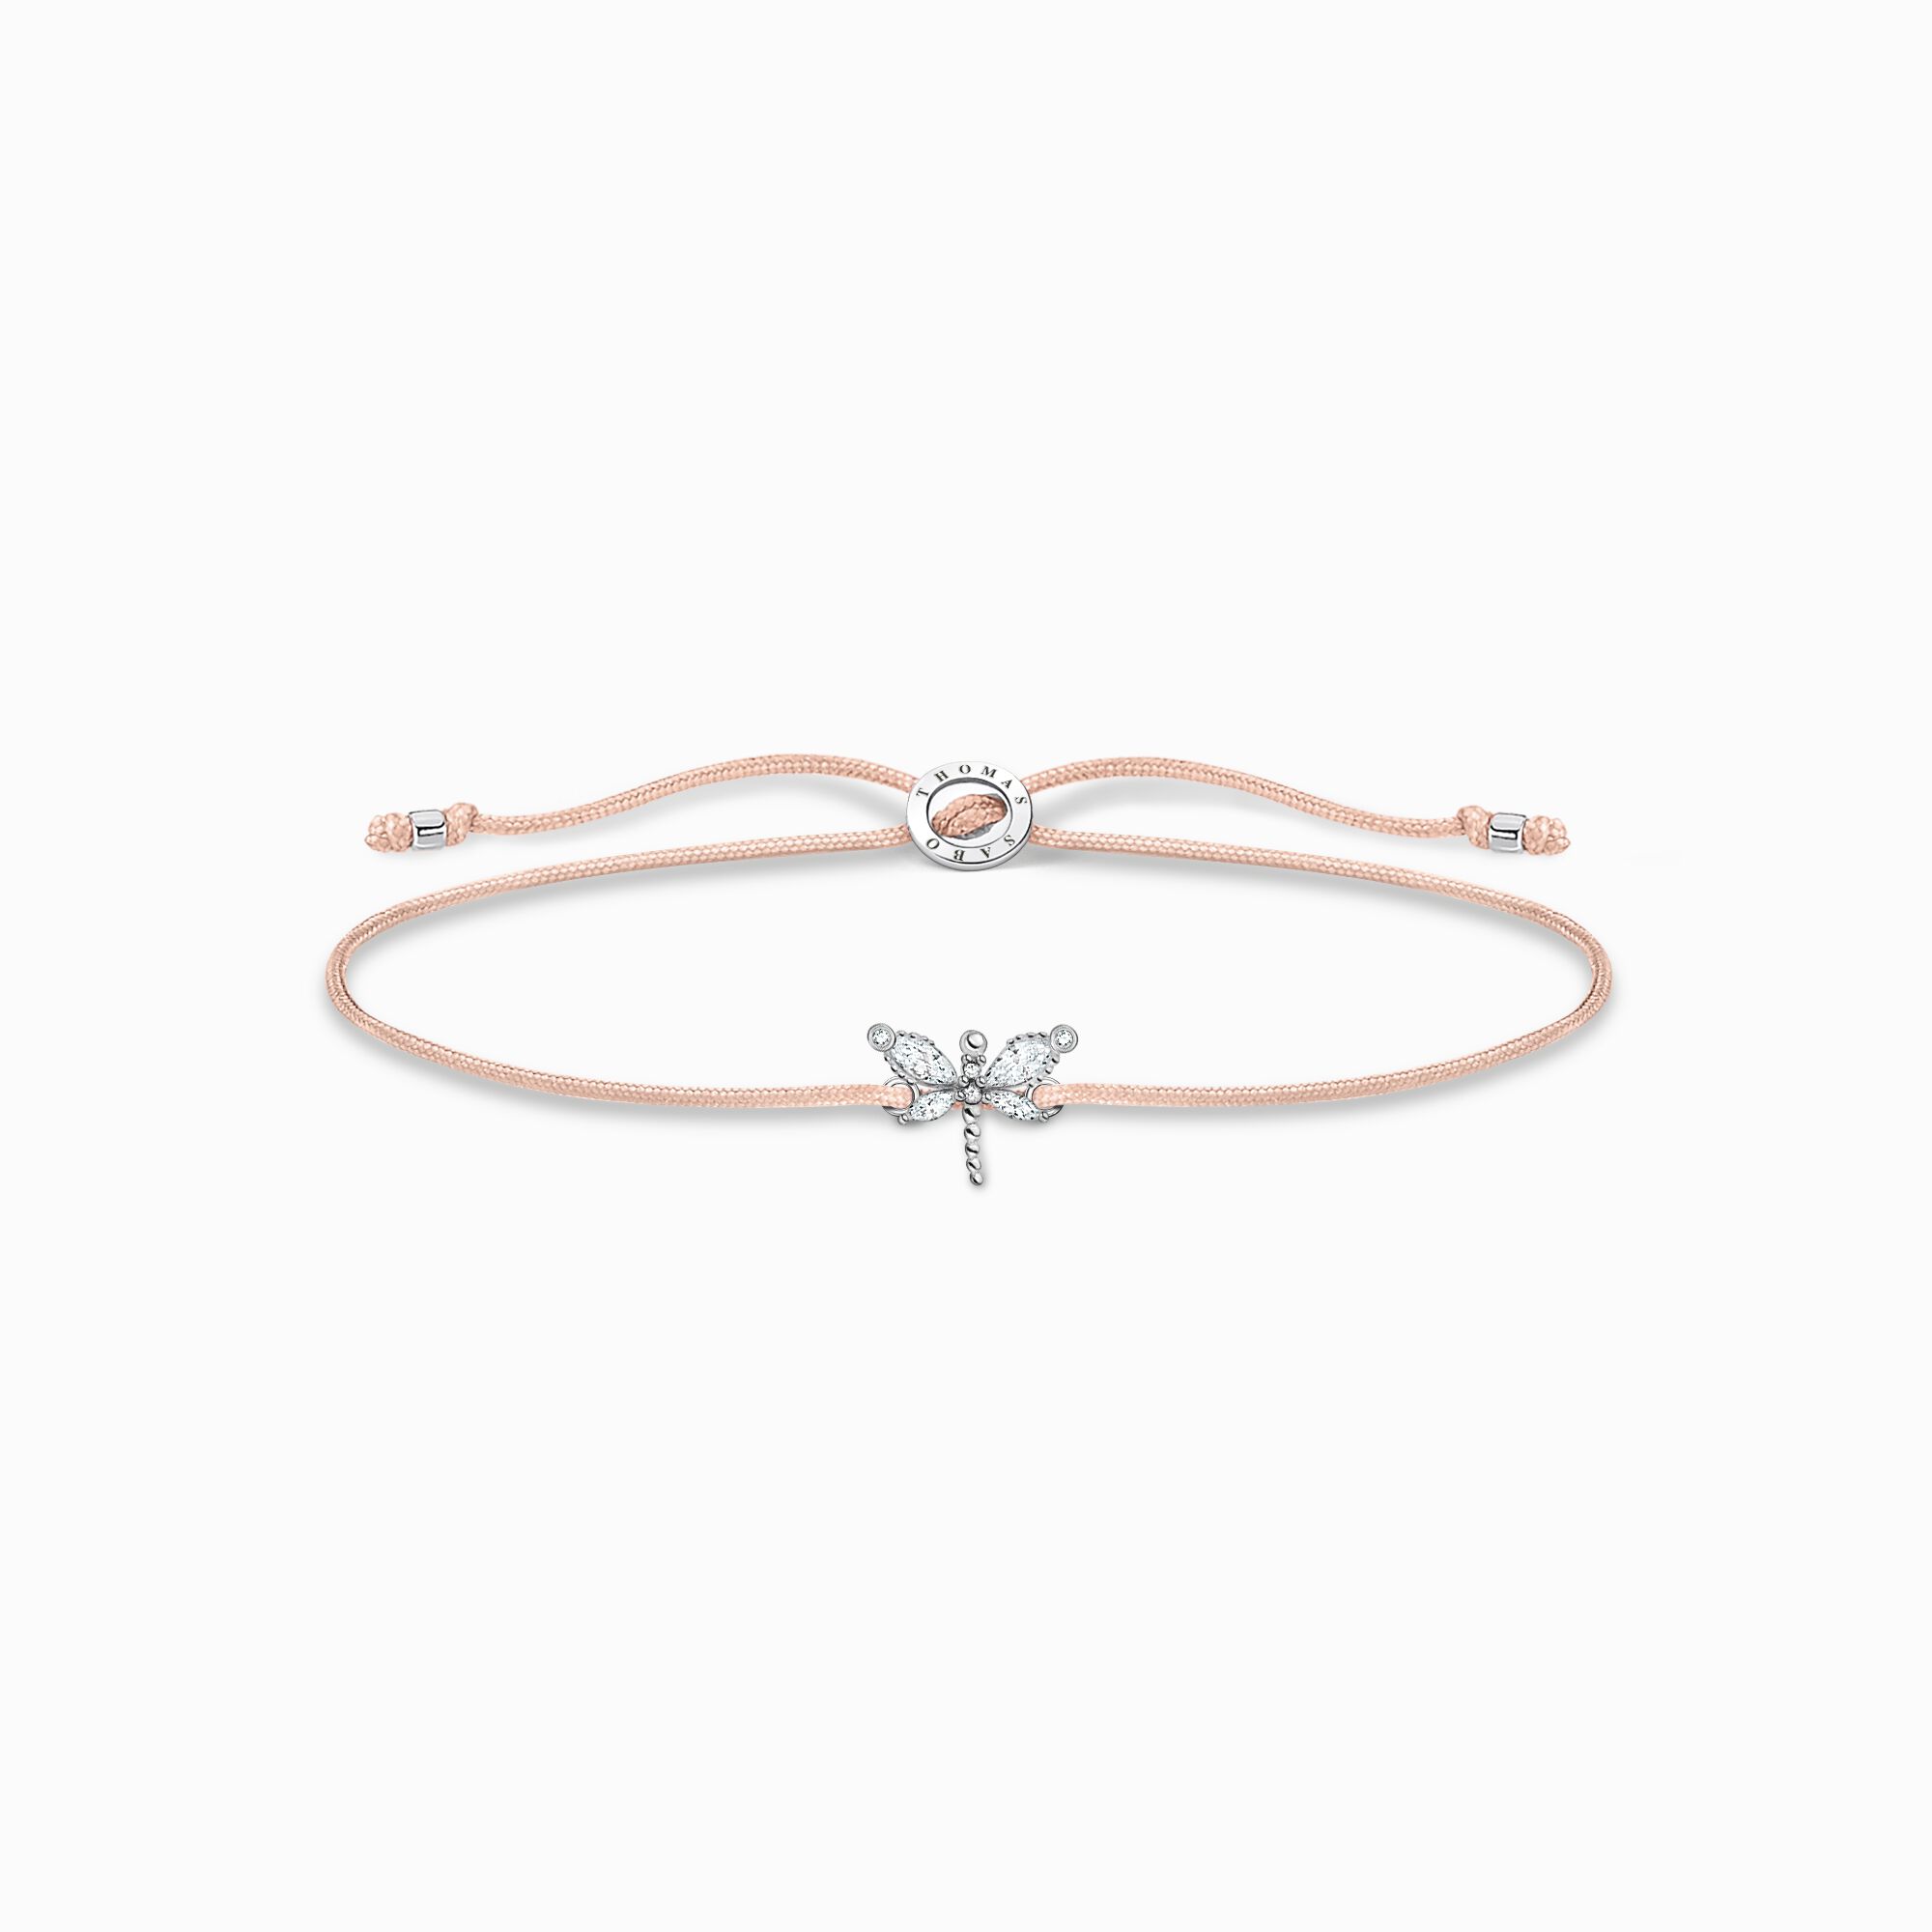 Bracelet Little Secret dragonfly white stones from the Charming Collection collection in the THOMAS SABO online store